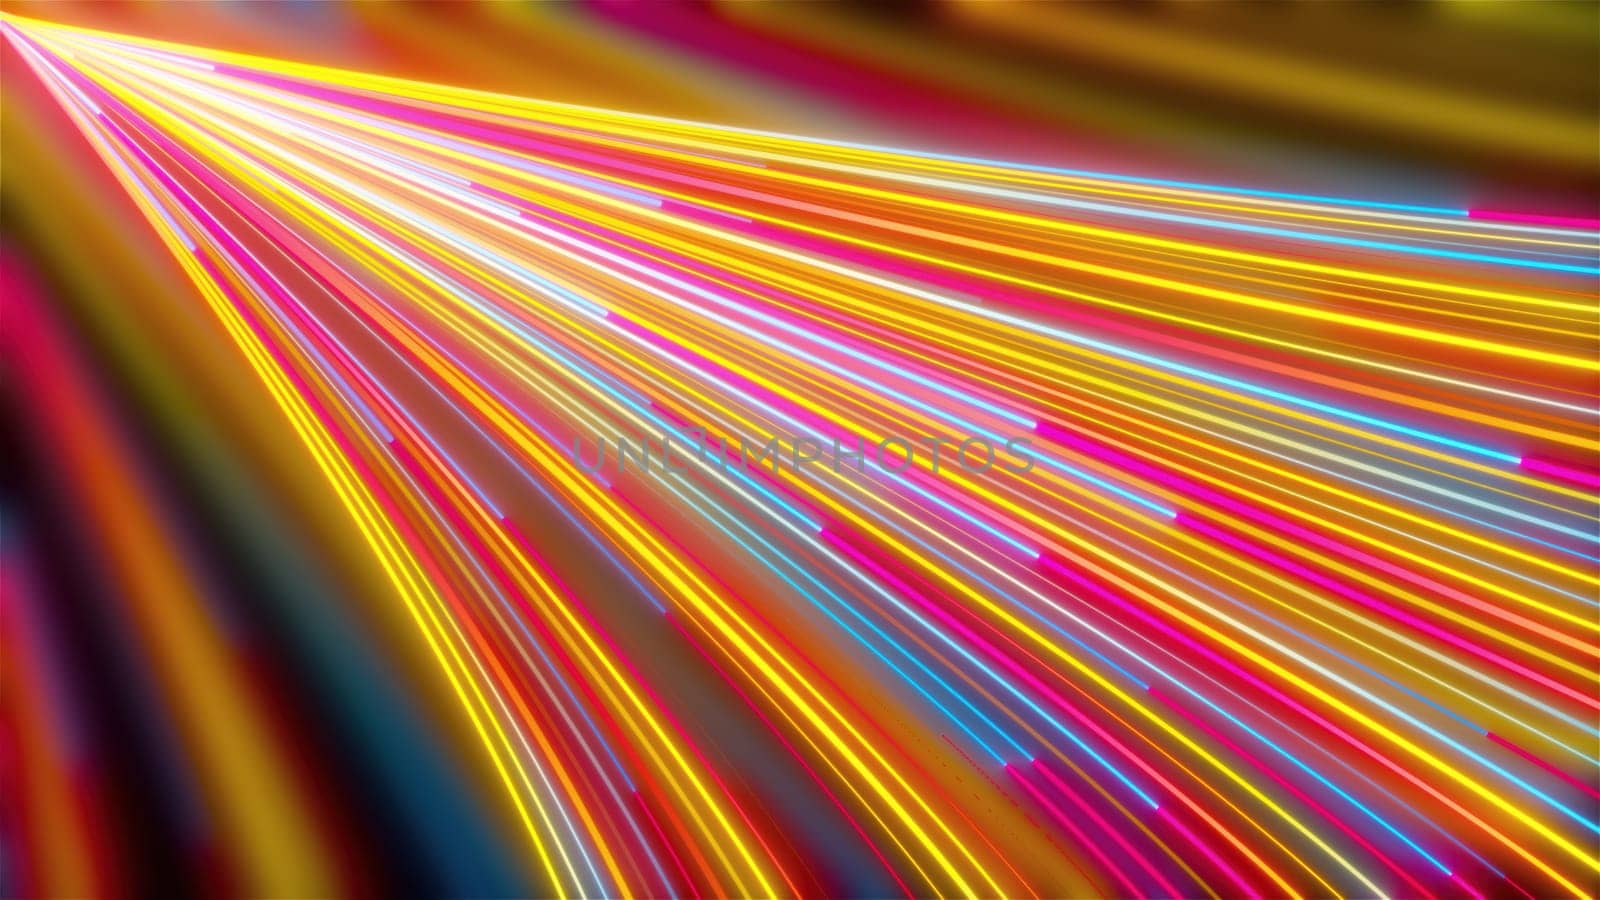 Glowing speed lines. Computer generated 3d render